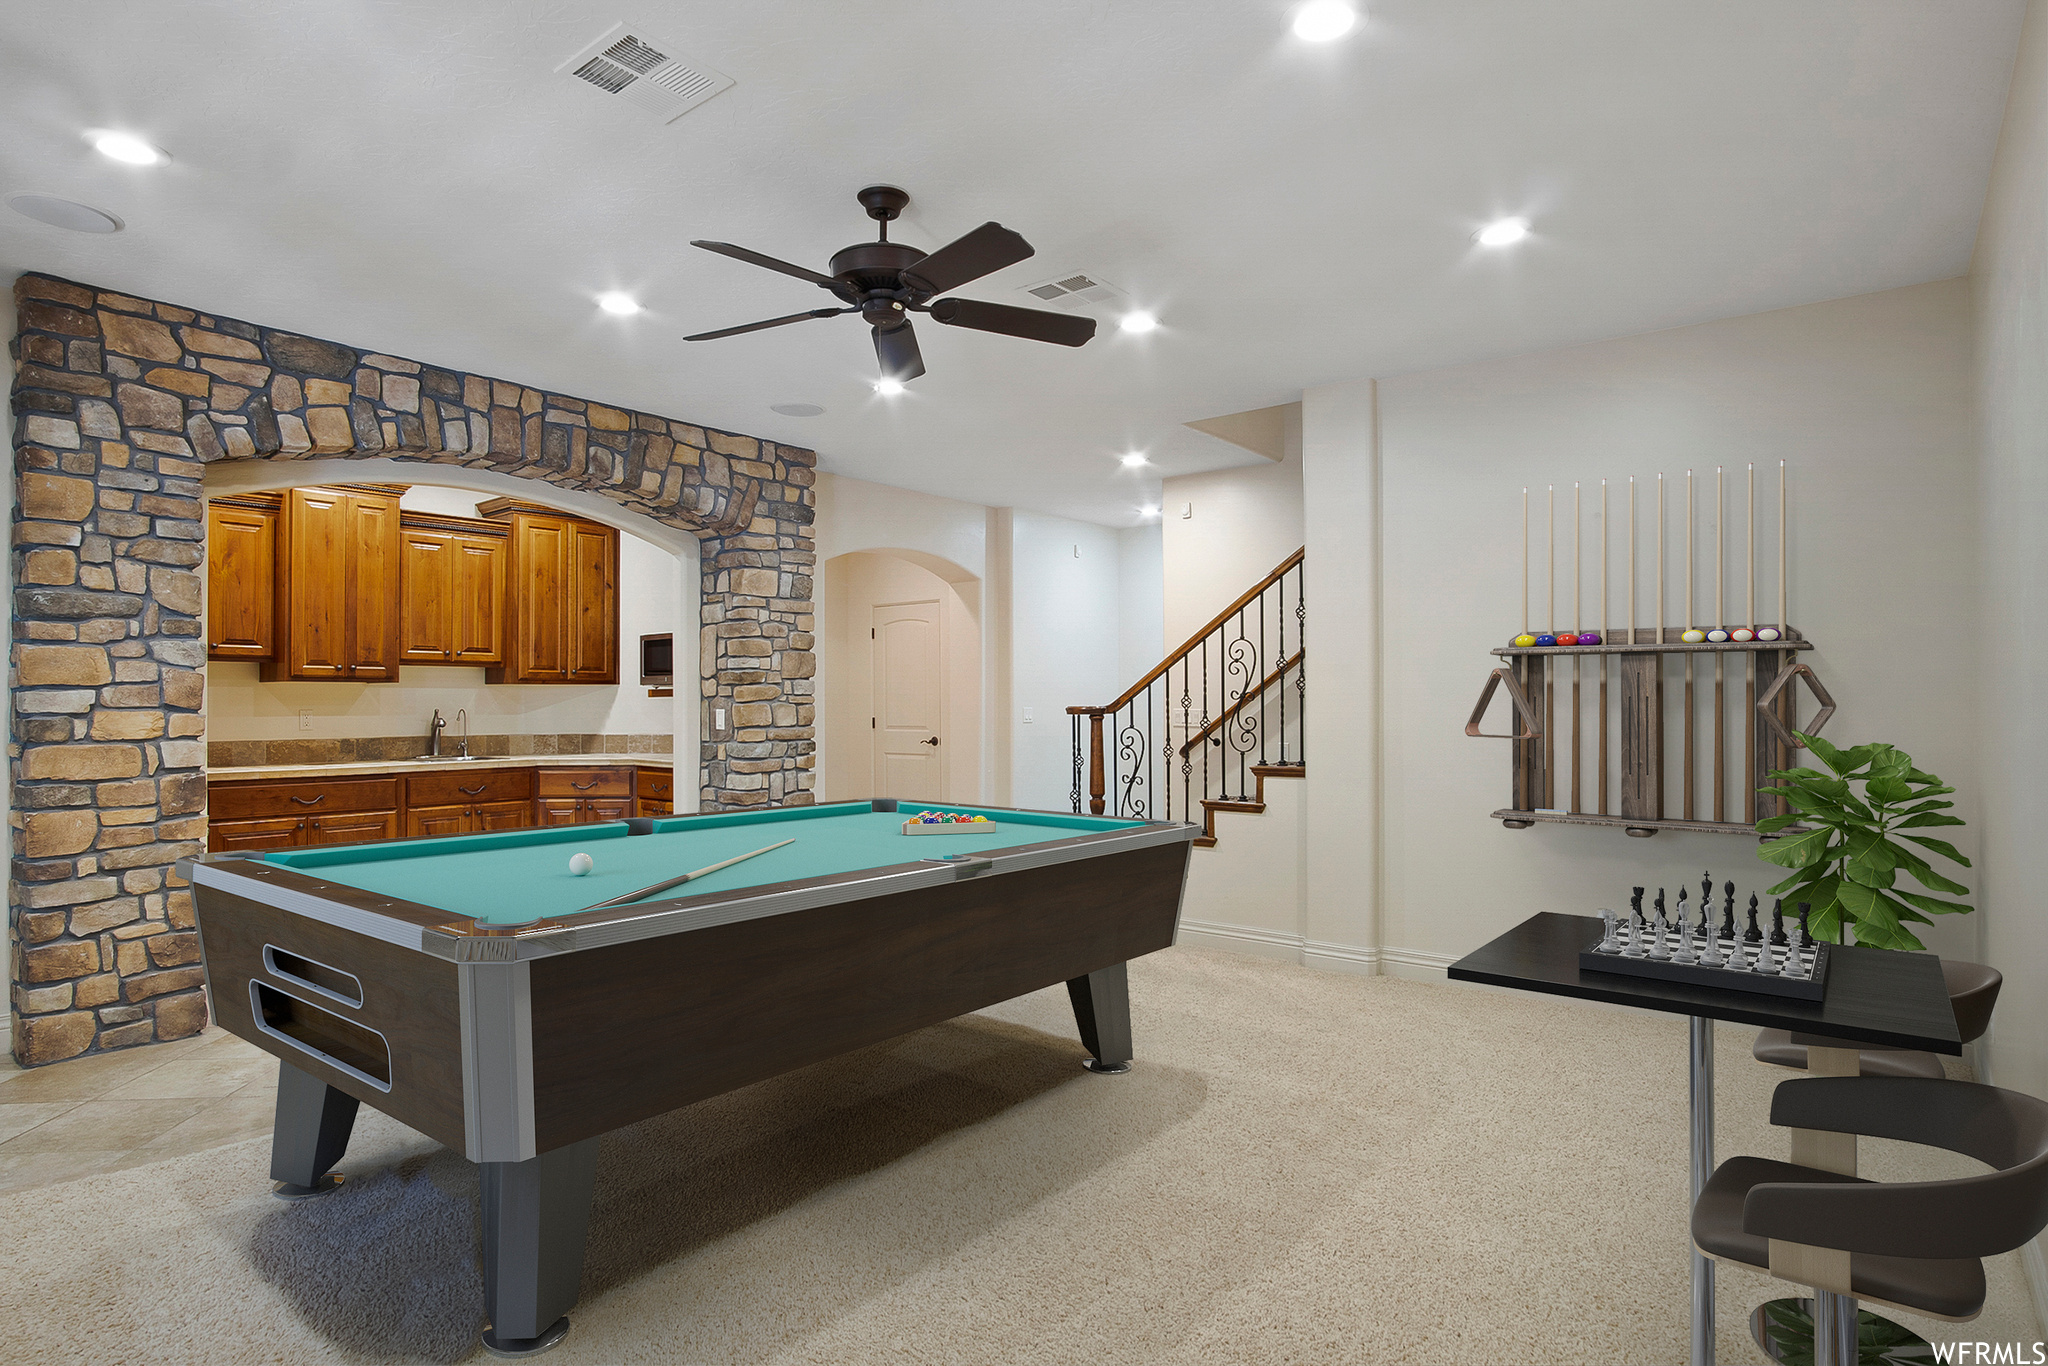 Some furniture virtually staged, pool table is negotiable.